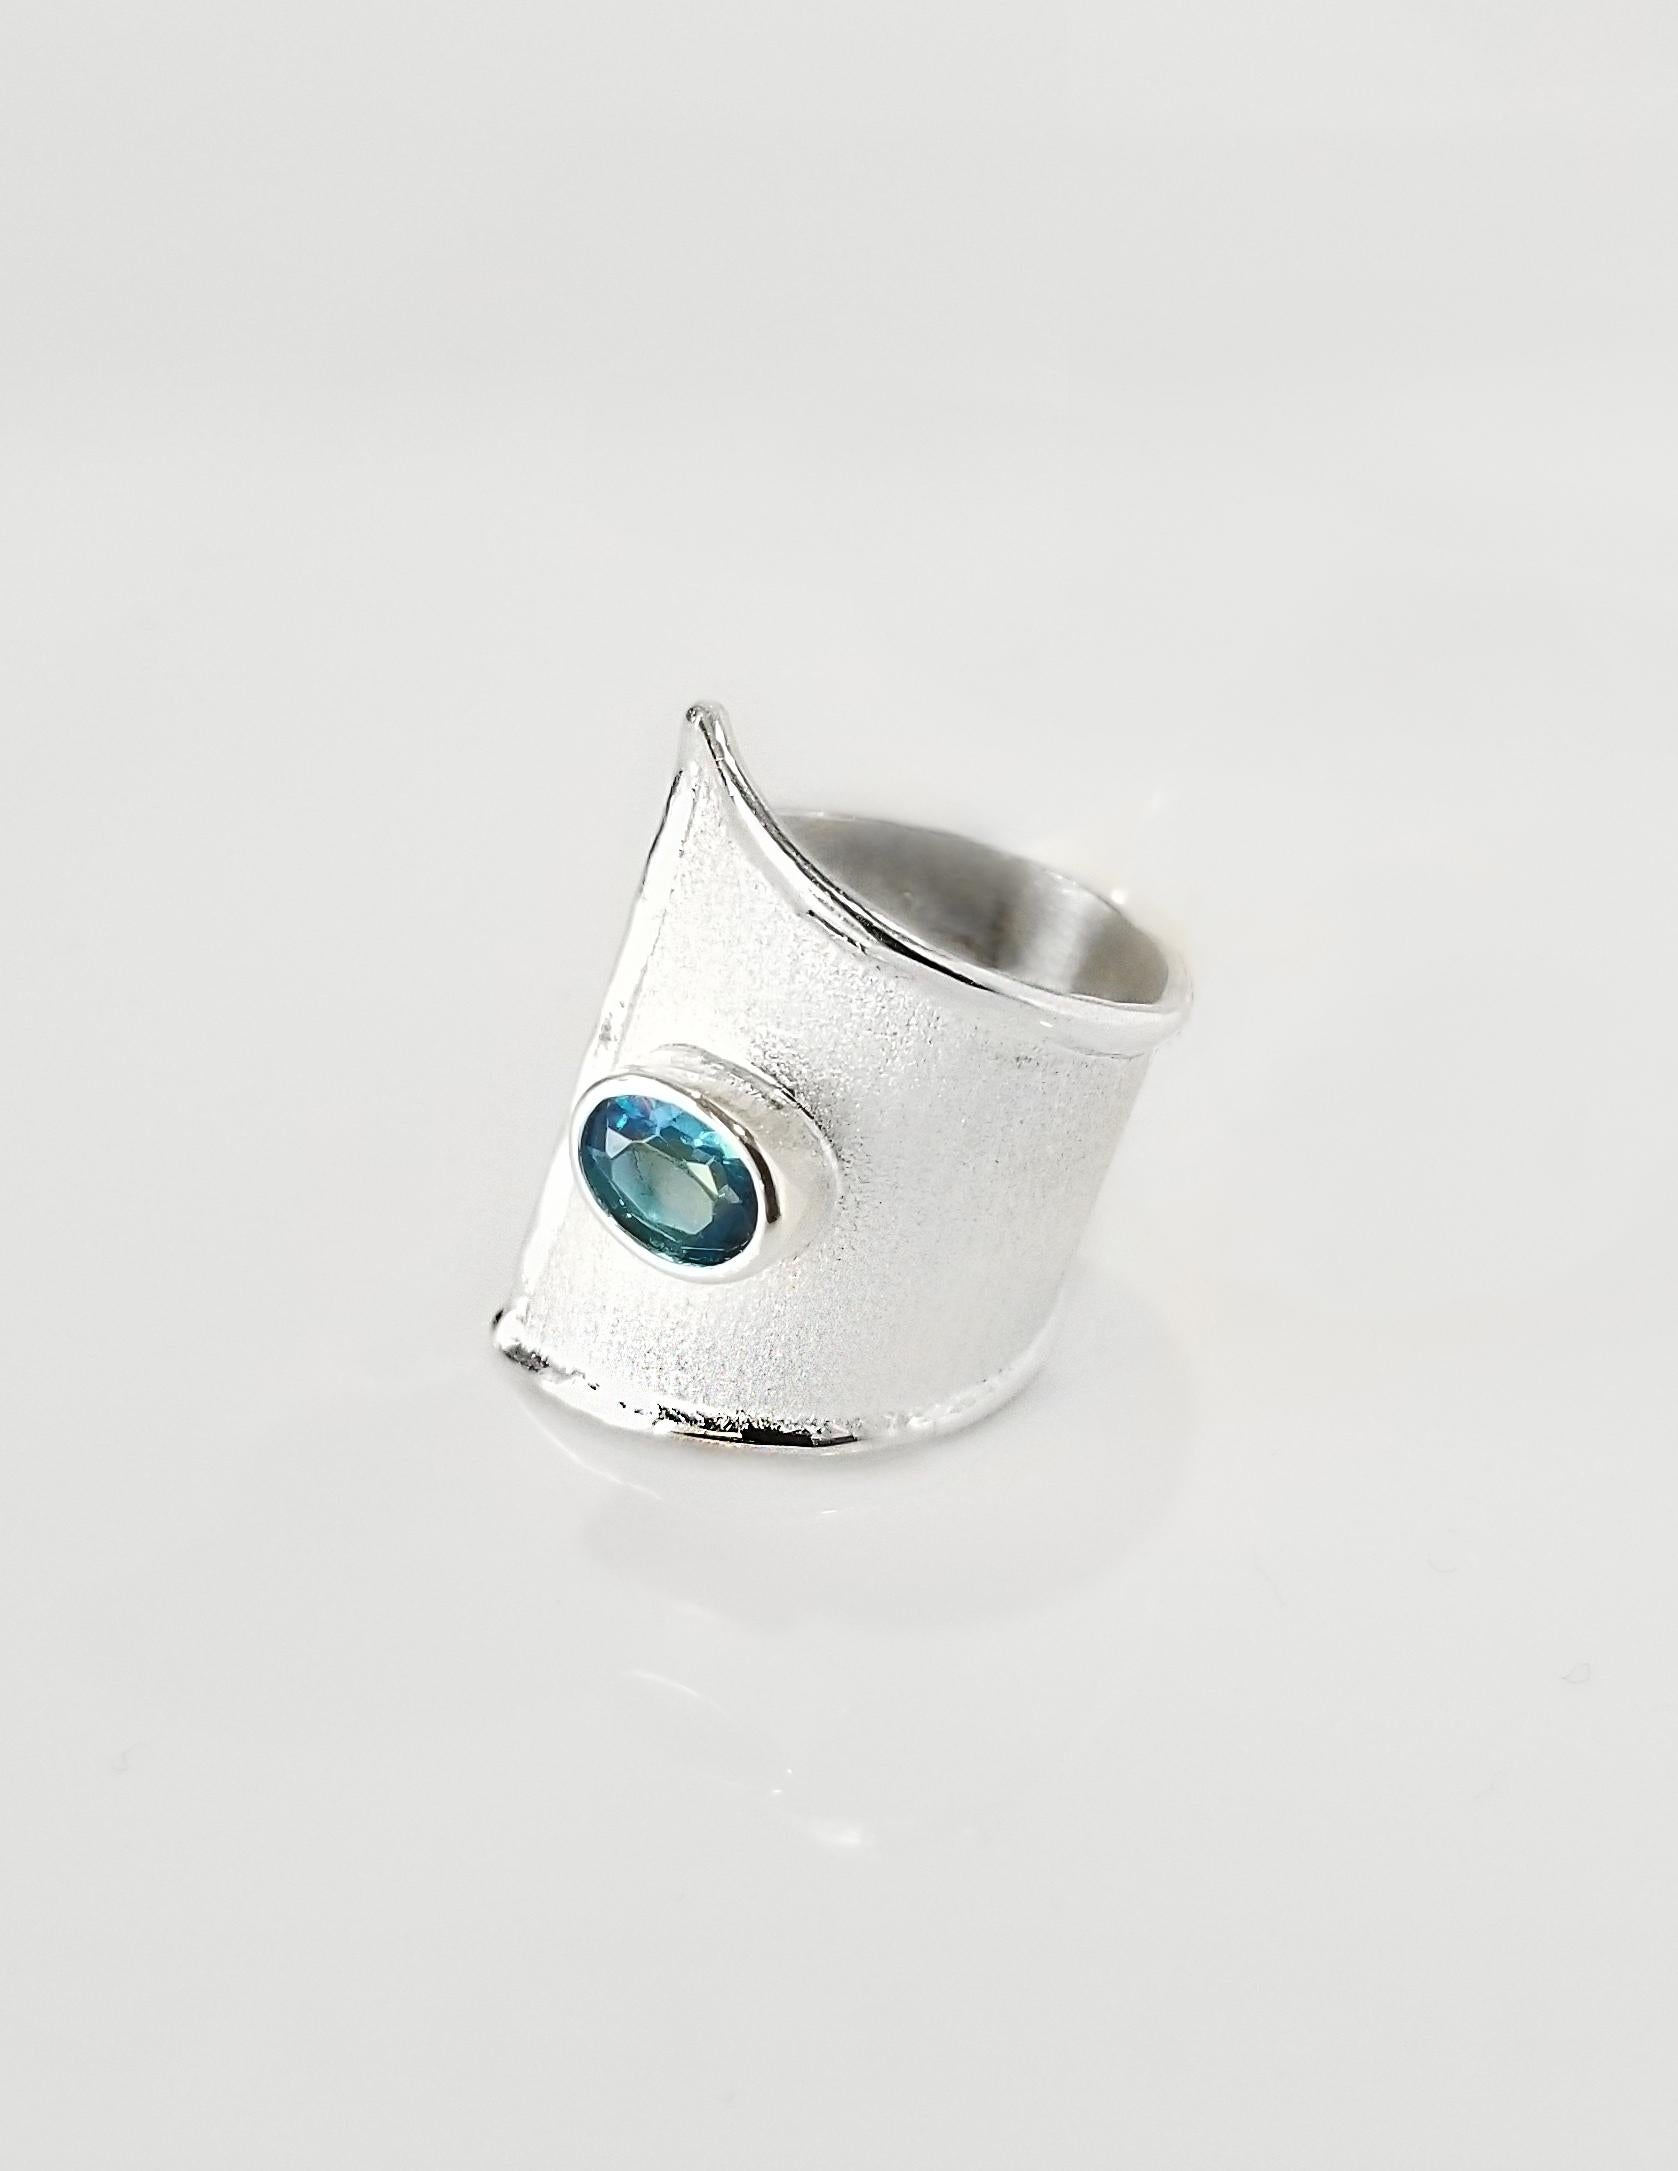 Artisan ring Yianni Creations from Ammos Collection handcrafted in Greece from fine silver 950 purity and plated with palladium to protect it from the tarnish. This adjustable ring is featuring 1.60 Carat Oval Cut London Blue Topaz complemented by